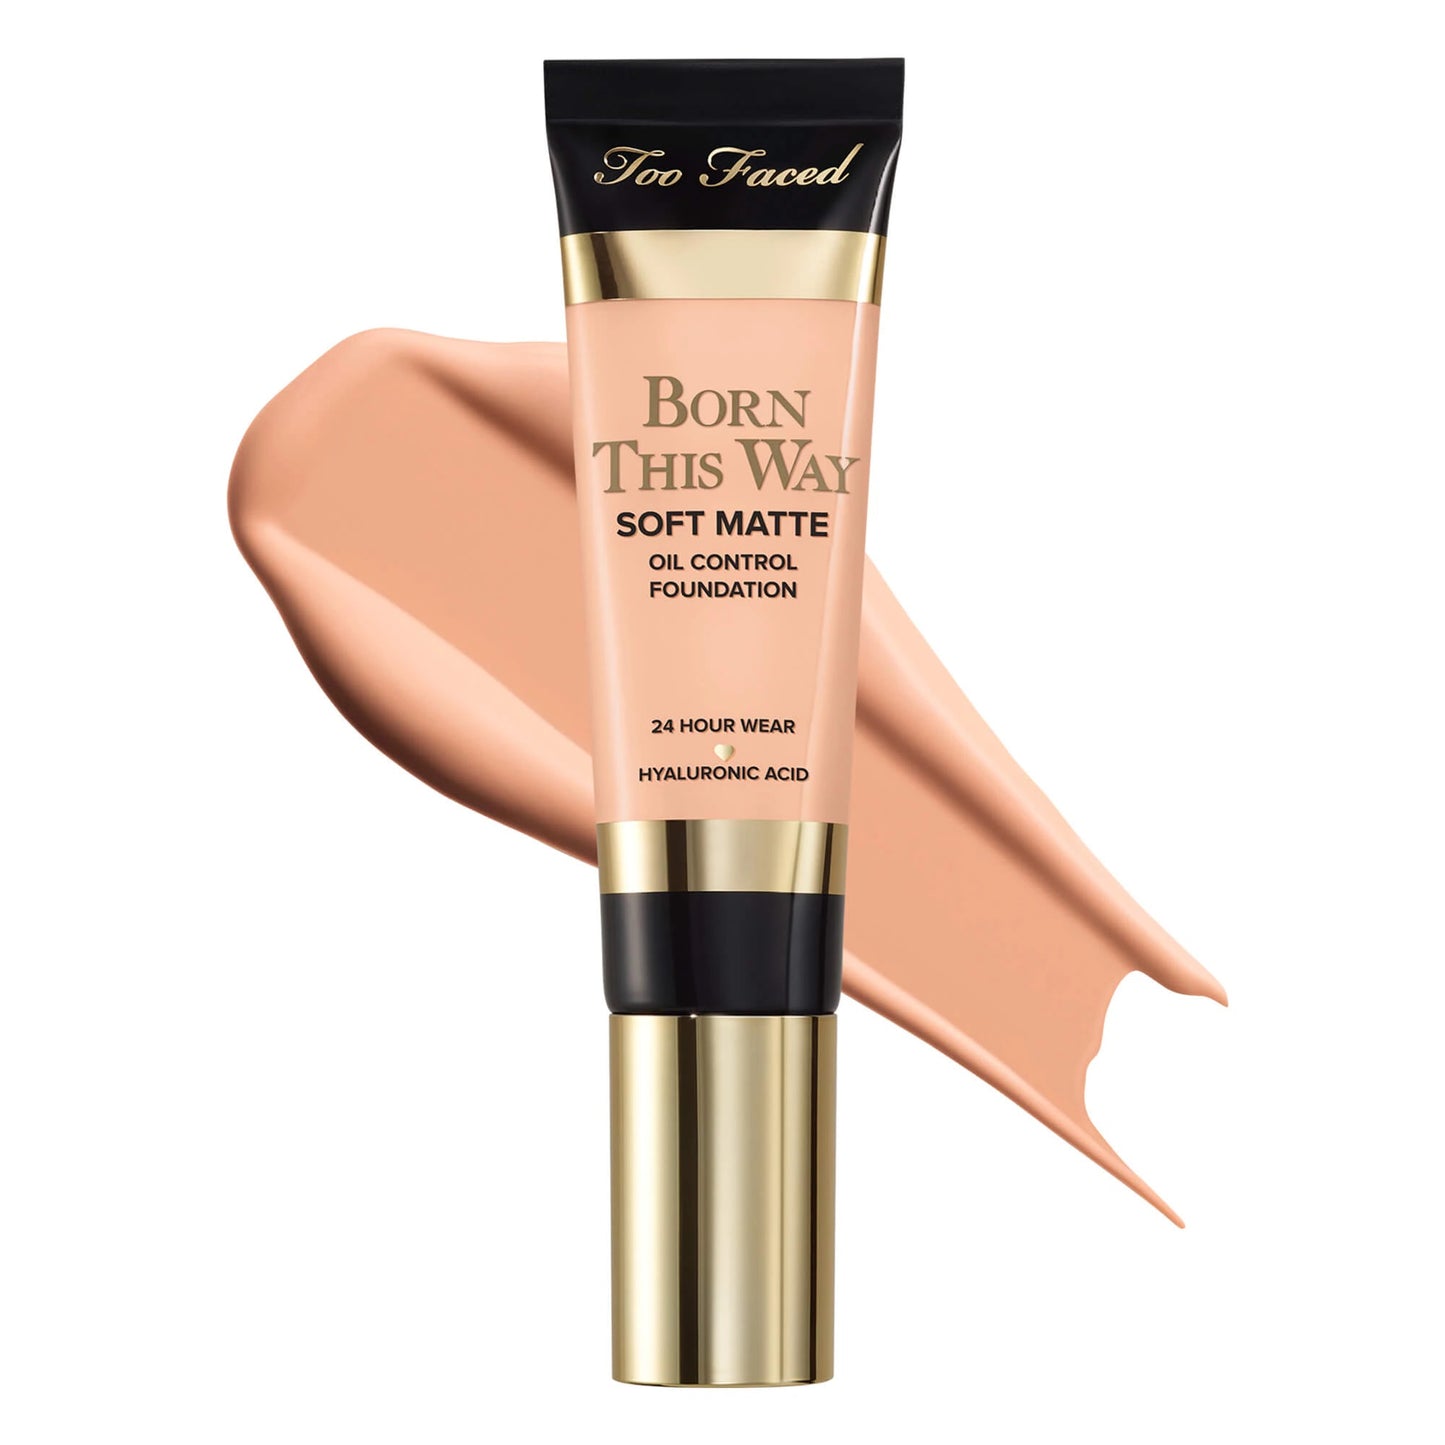 Too Faced Born This Way Soft Matte Foundation 30ml - Seashell